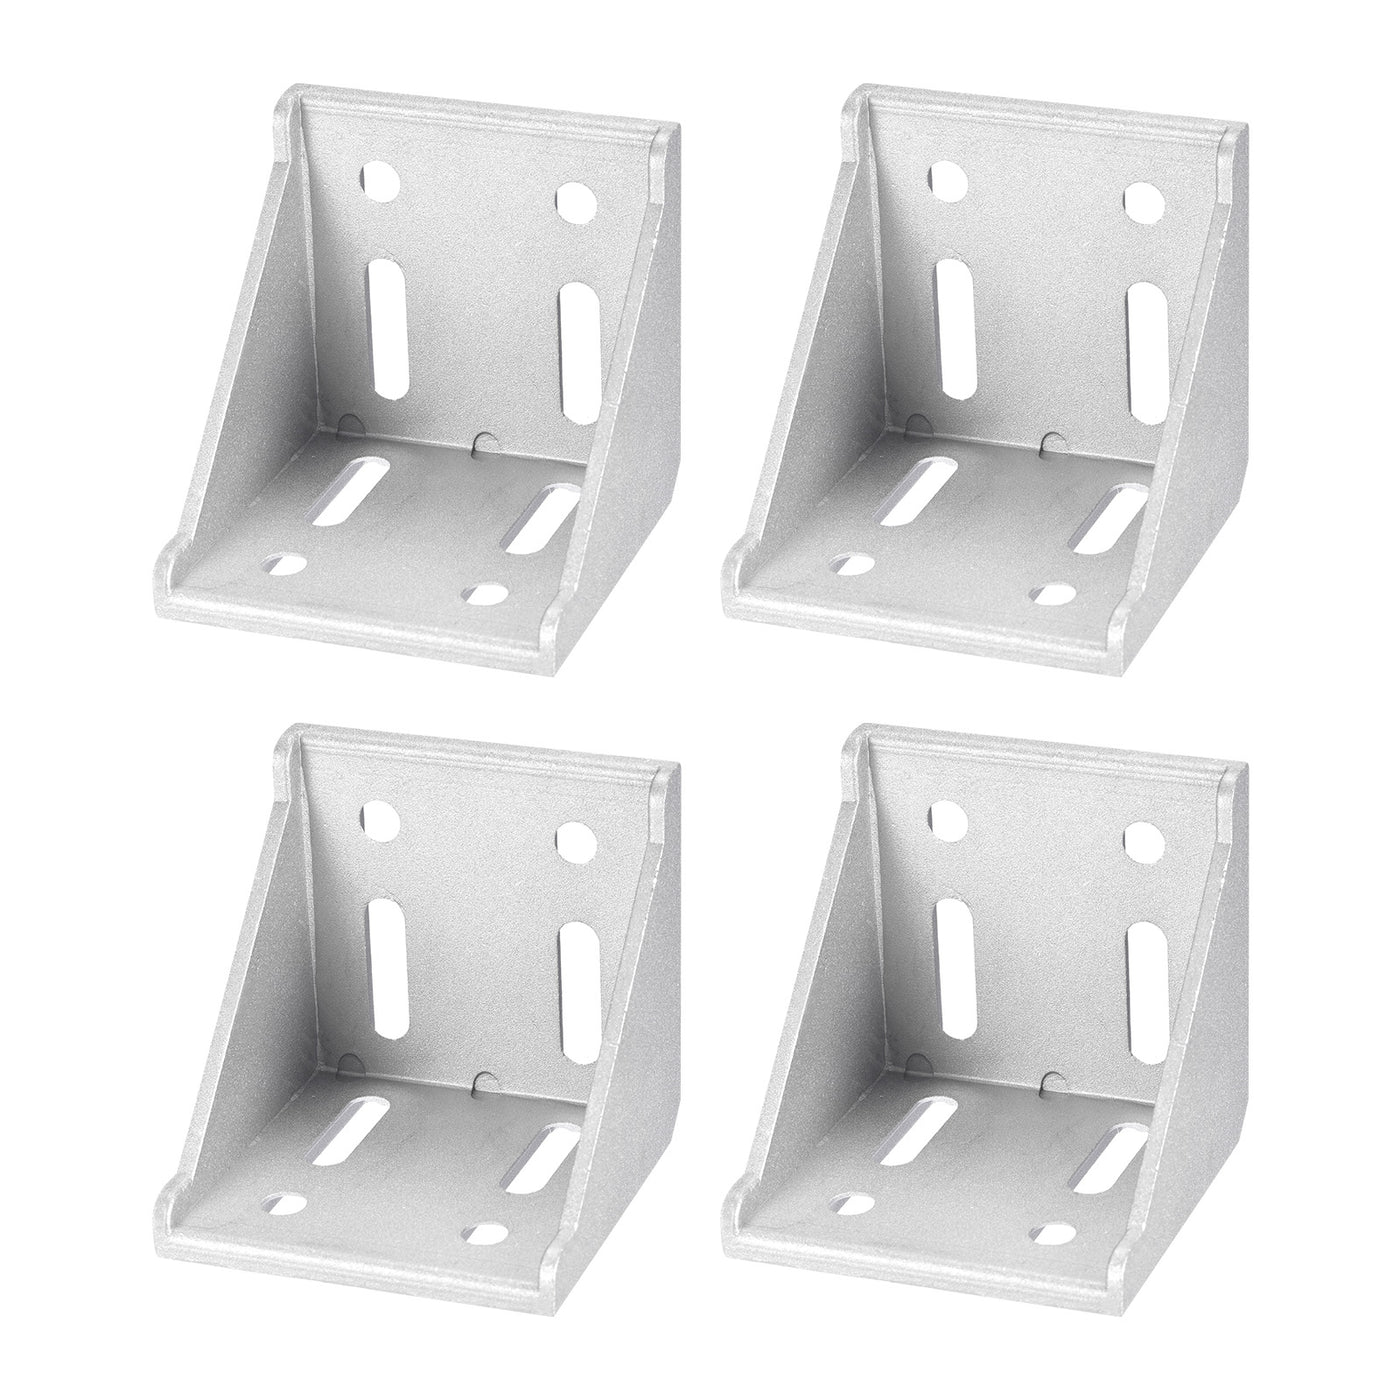 uxcell Uxcell 4Pcs Inside Corner Bracket Gusset, 78x78x79mm 8080 Angle Connectors for 4080/8080 Series Aluminum Extrusion Profile Silver